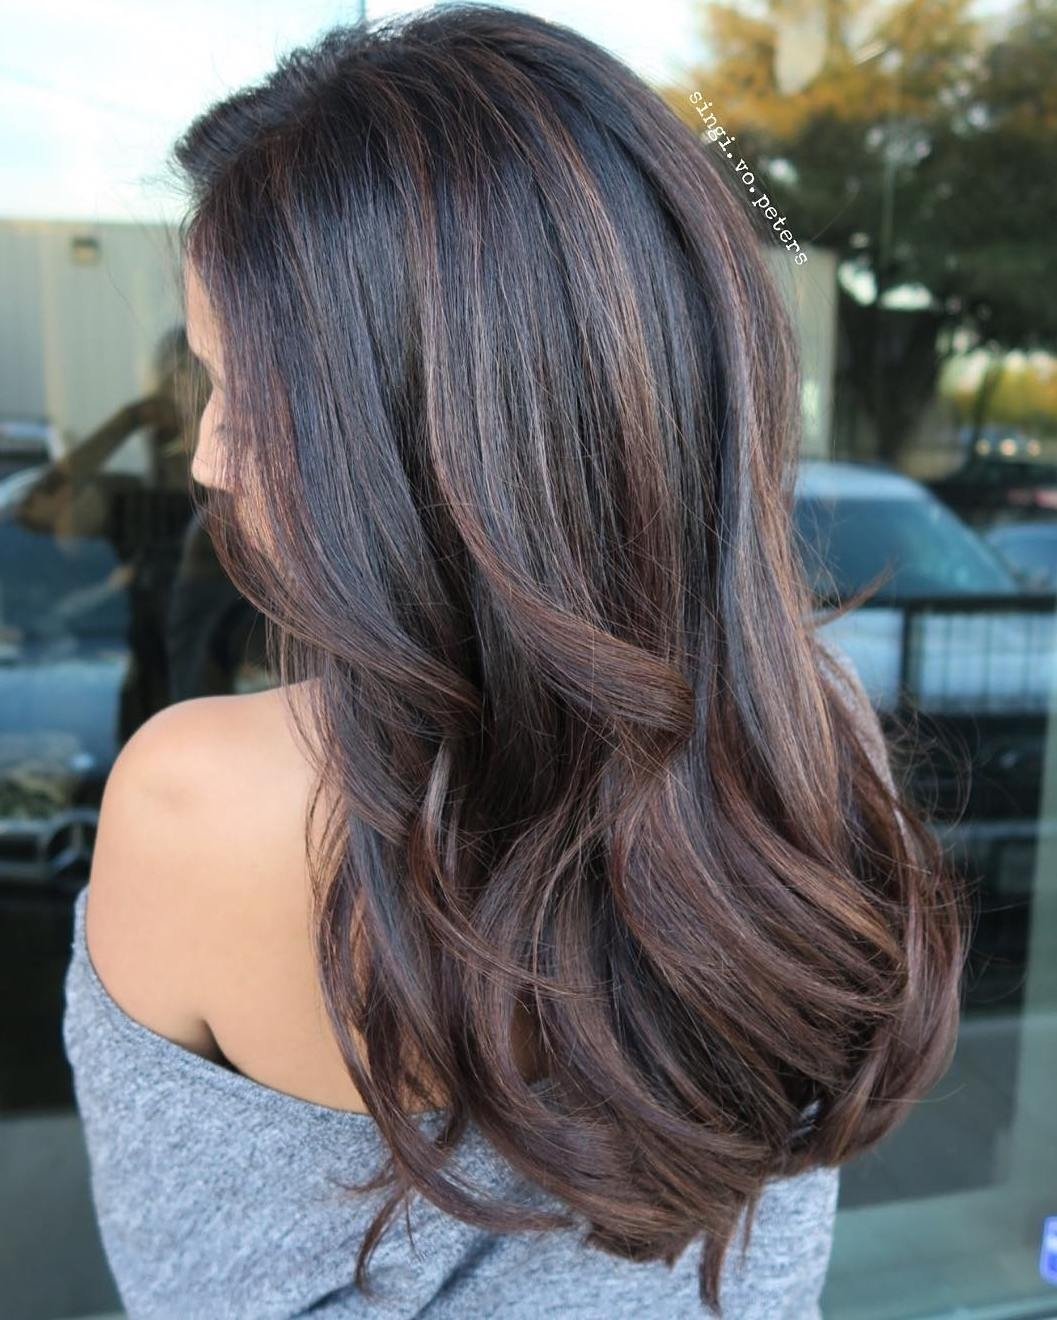 10 Lovely Color Ideas For Dark Hair 70 balayage hair color ideas with blonde brown and caramel highlights 2 2022